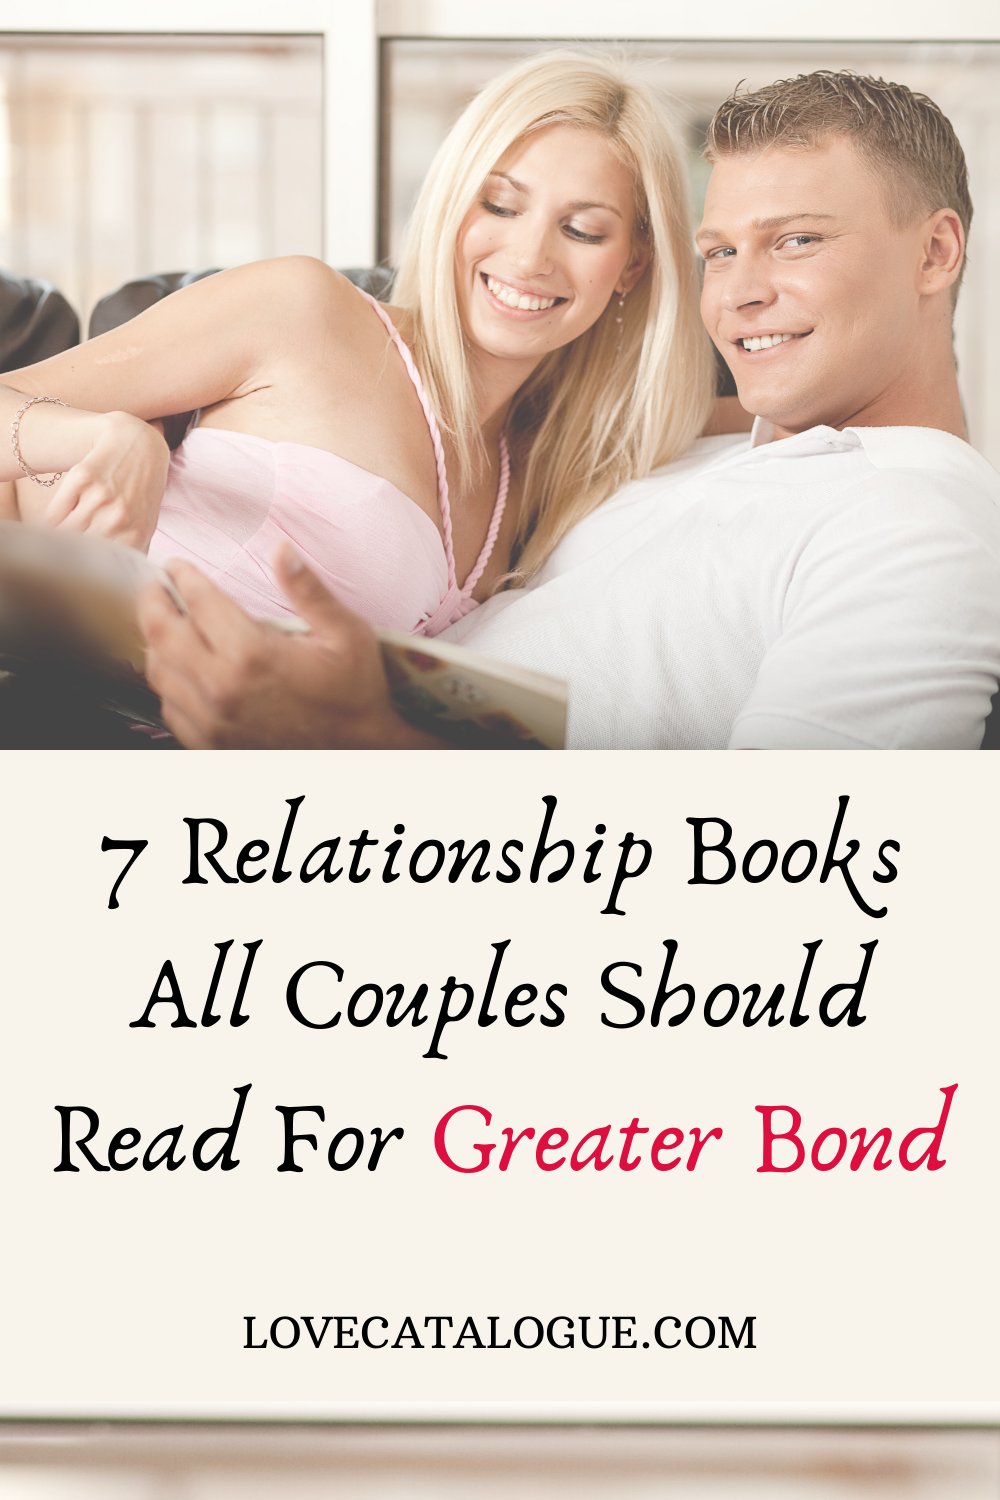 Relationship books for couples